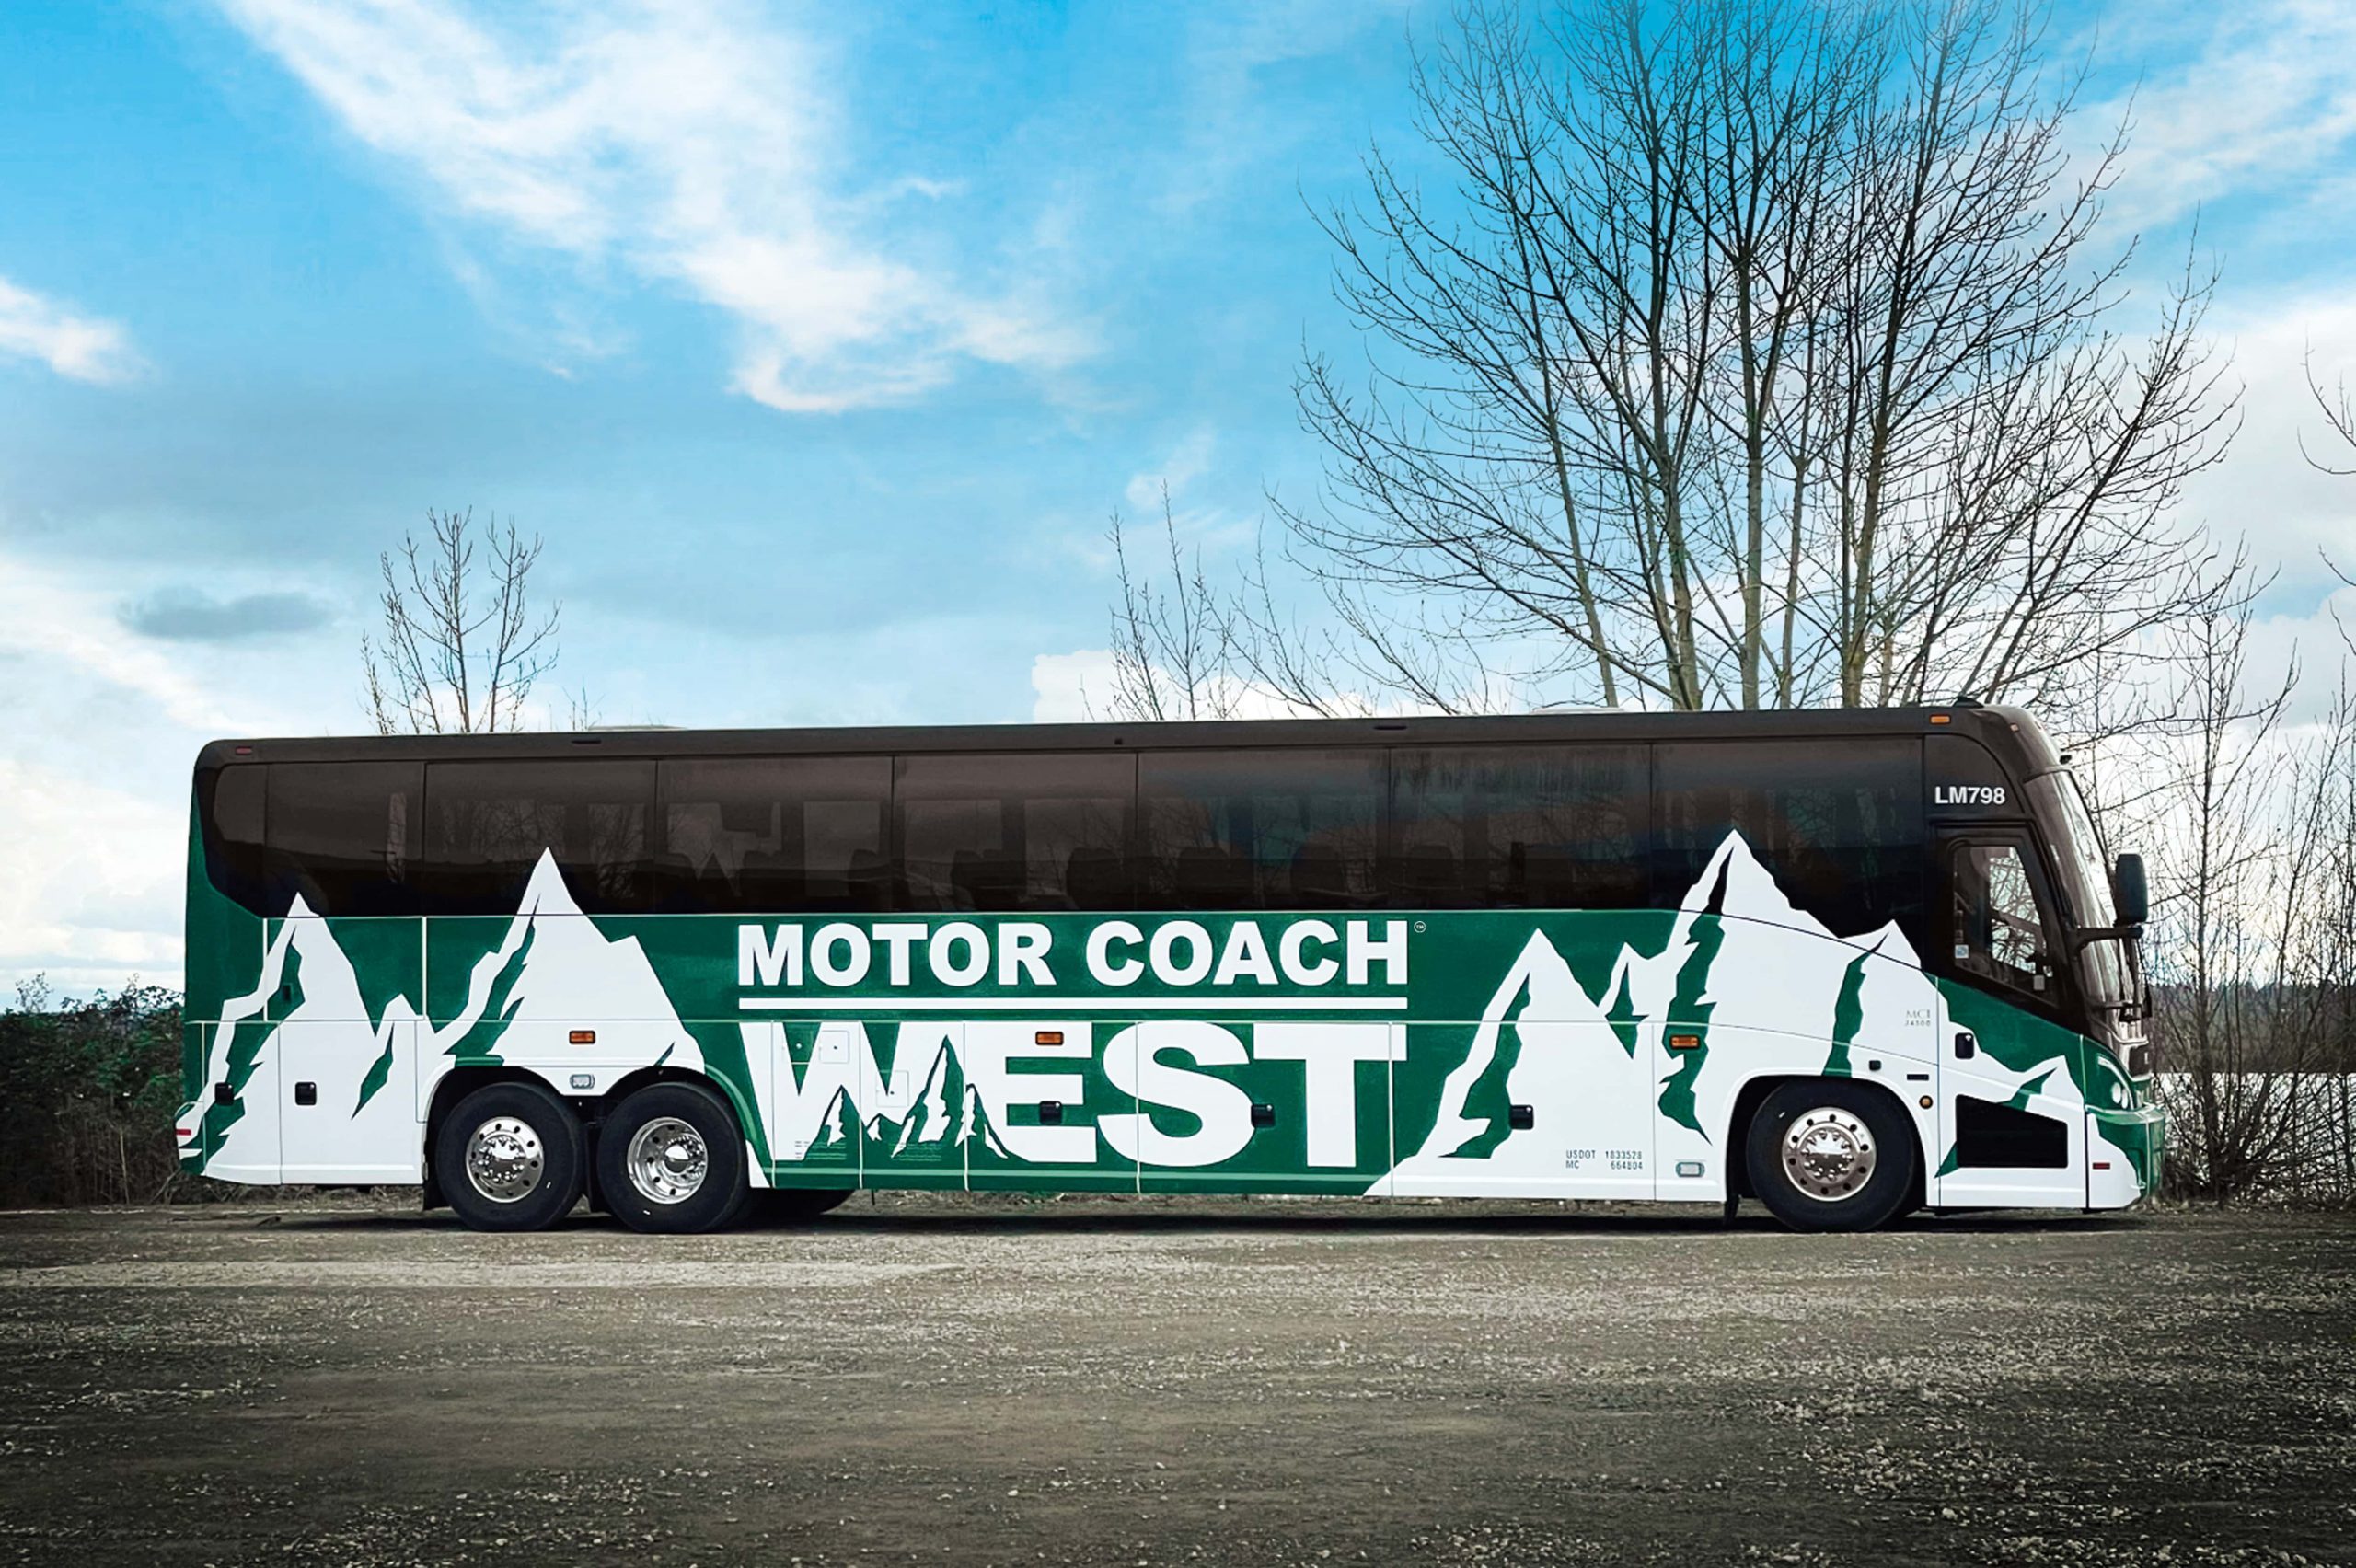 Green Motor Coach West bus against partly cloudy sky background.